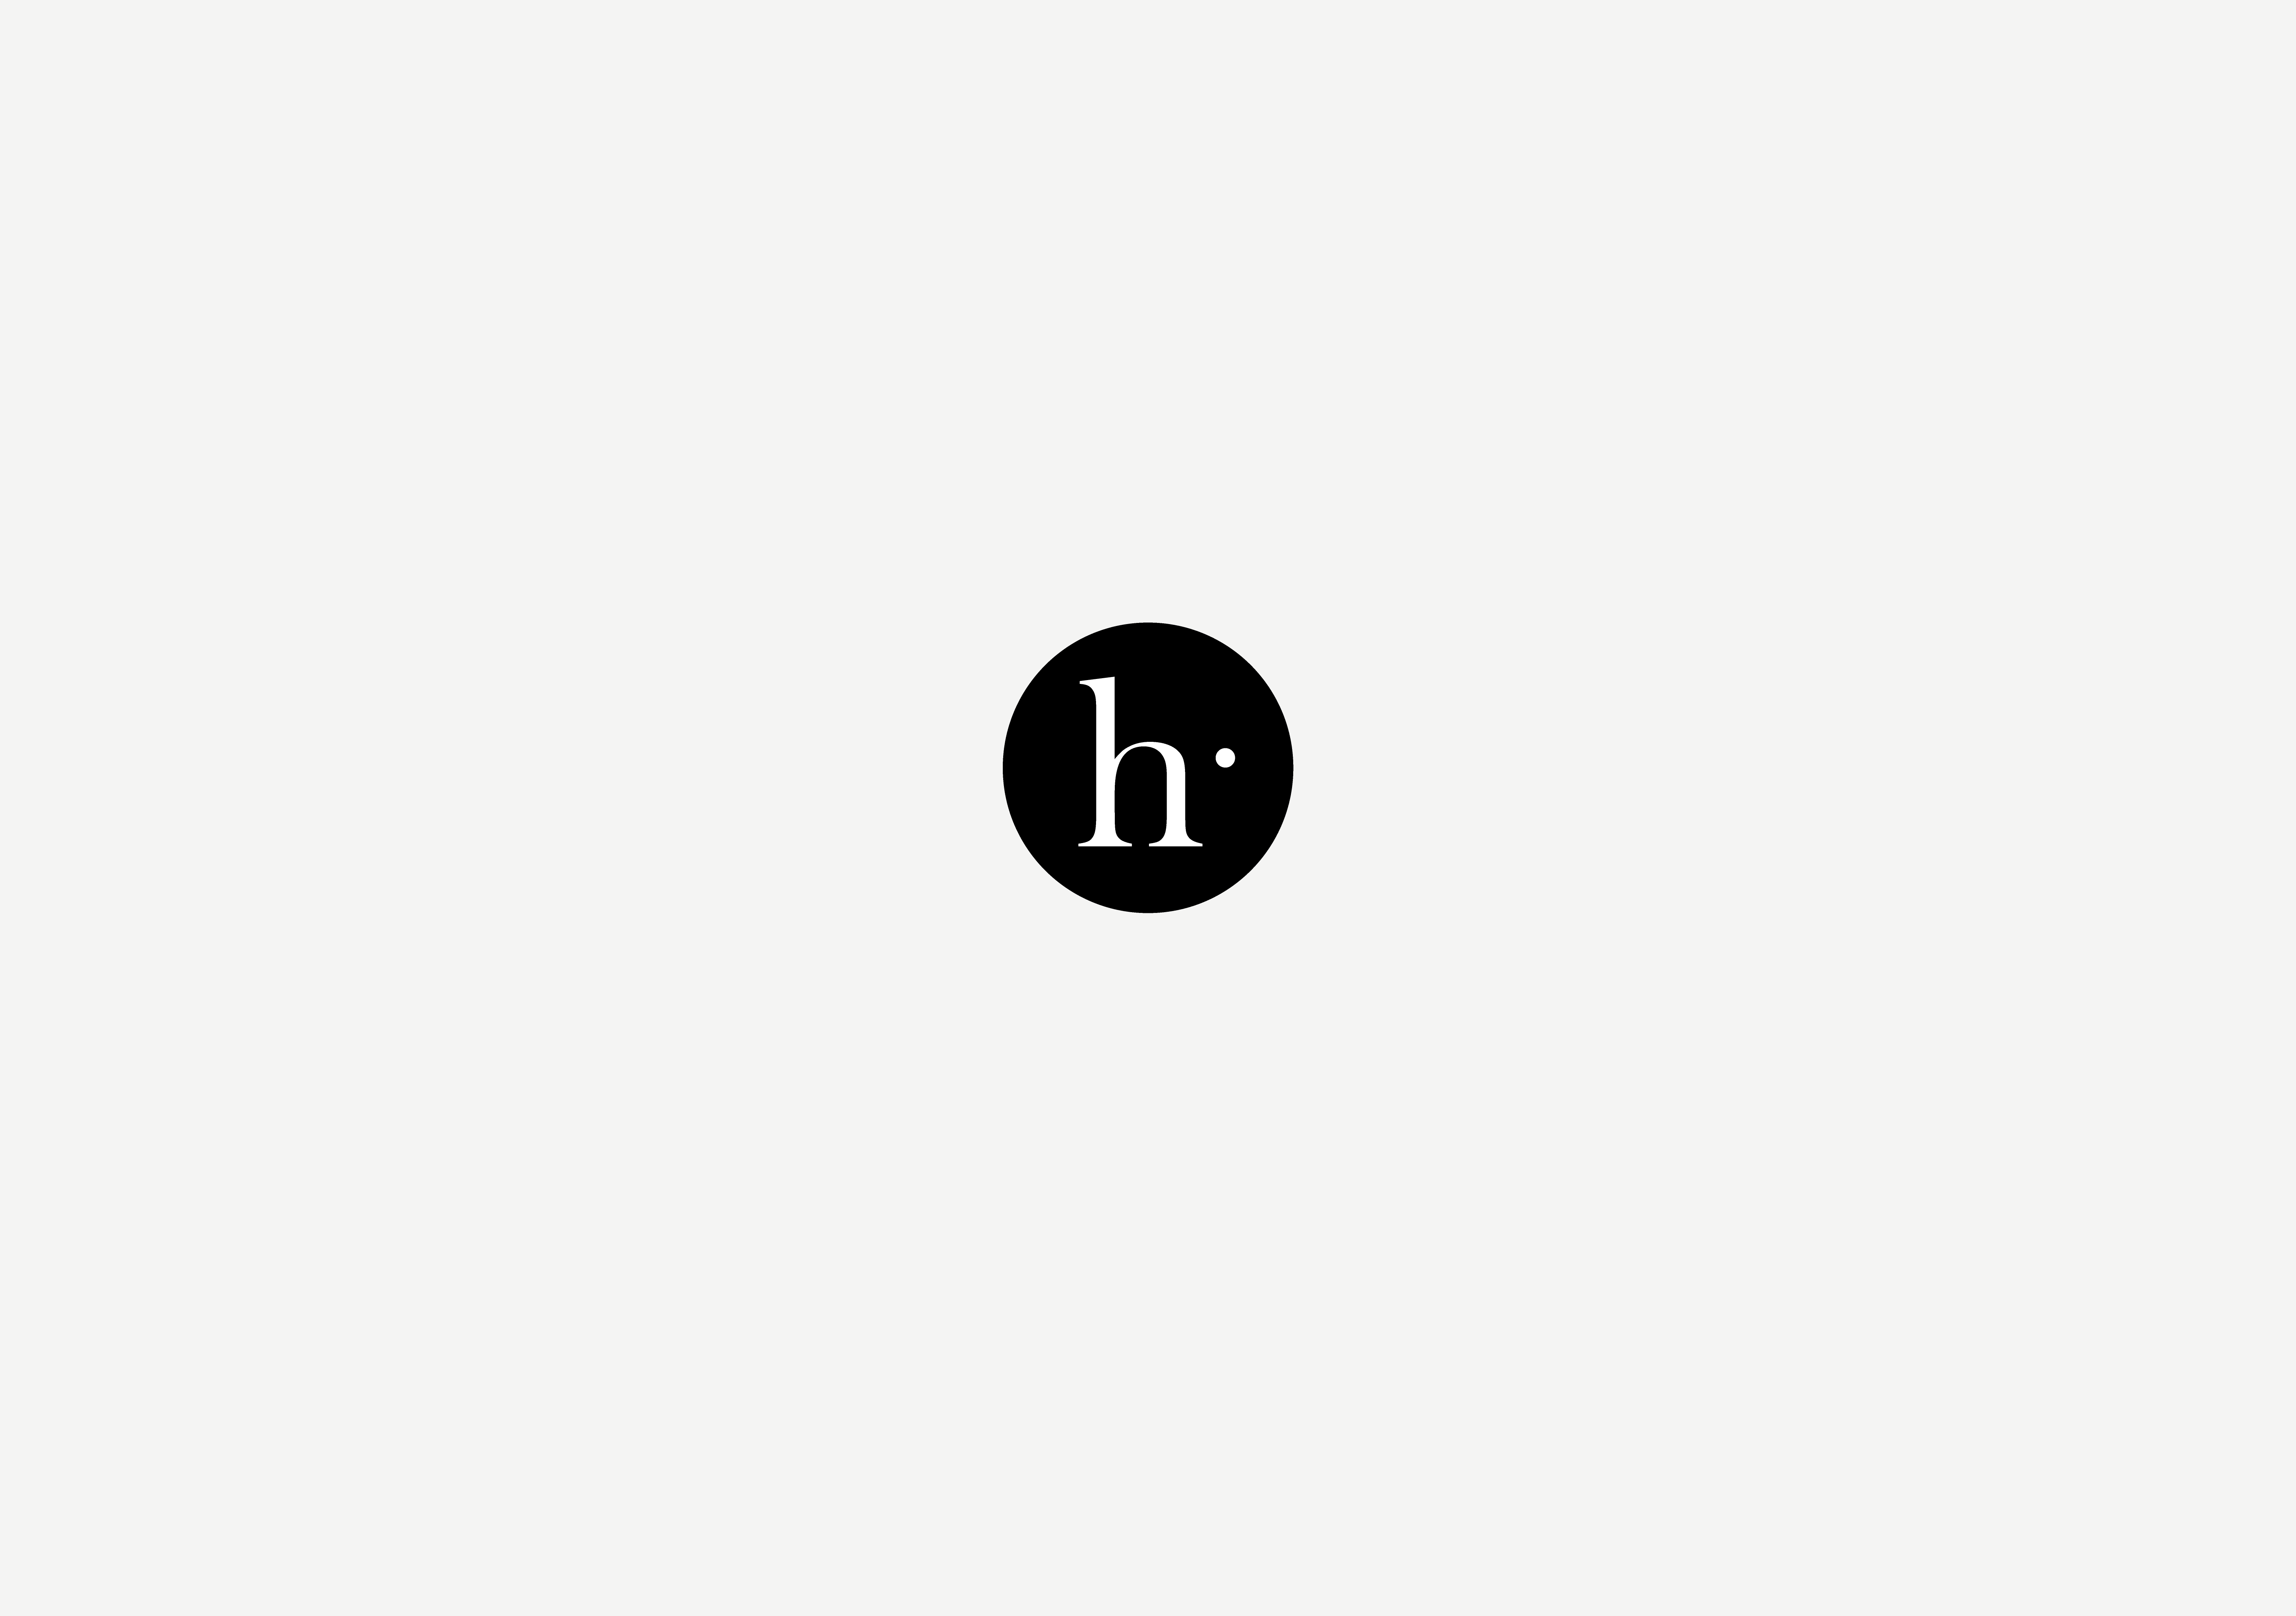 Branding for Habitude, a Québec lifestyle and product company by Ottawa Graphic Designer idApostle